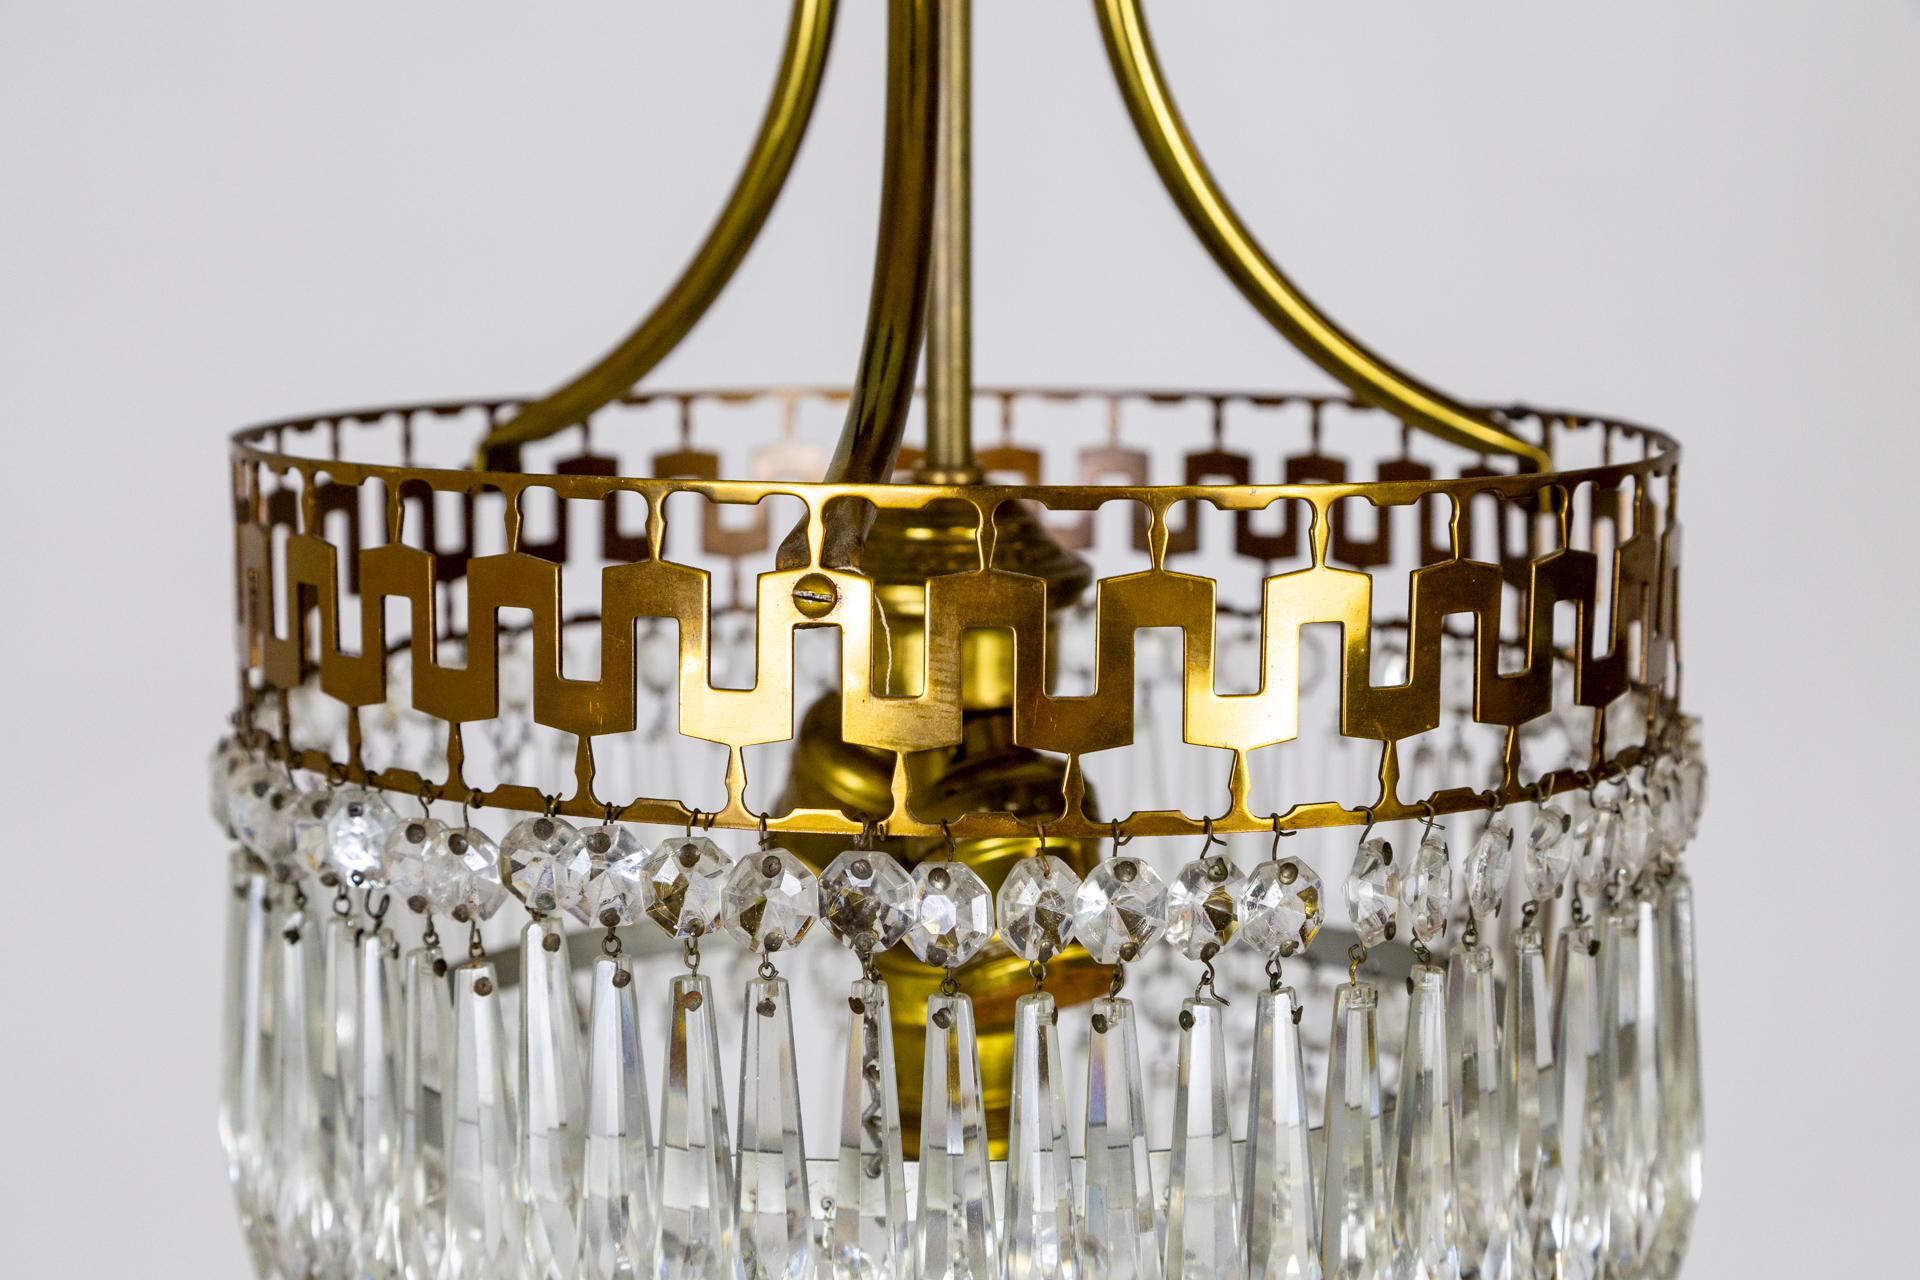 Mid-20th Cent. Neoclassical Cut Brass & Crystal Wedding Cake Pendant Light For Sale 2